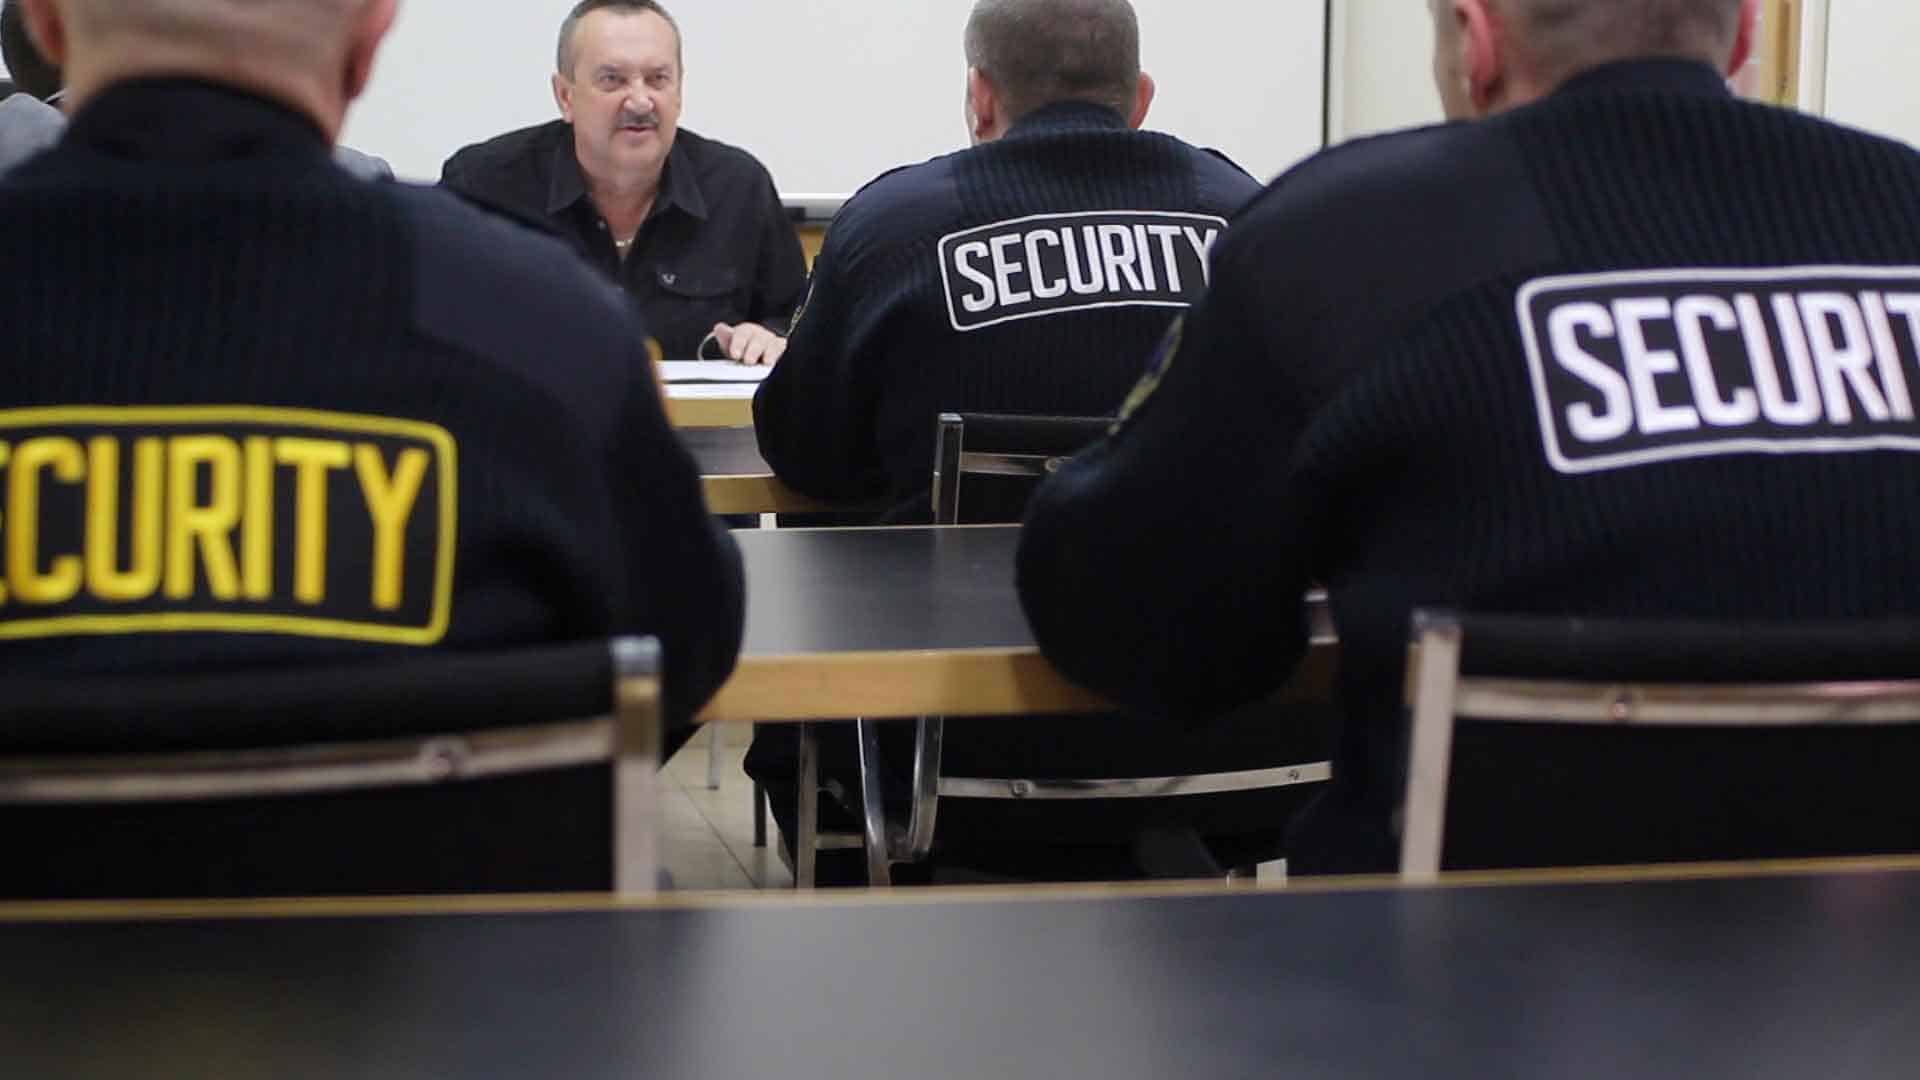 Security Guards in a Training class